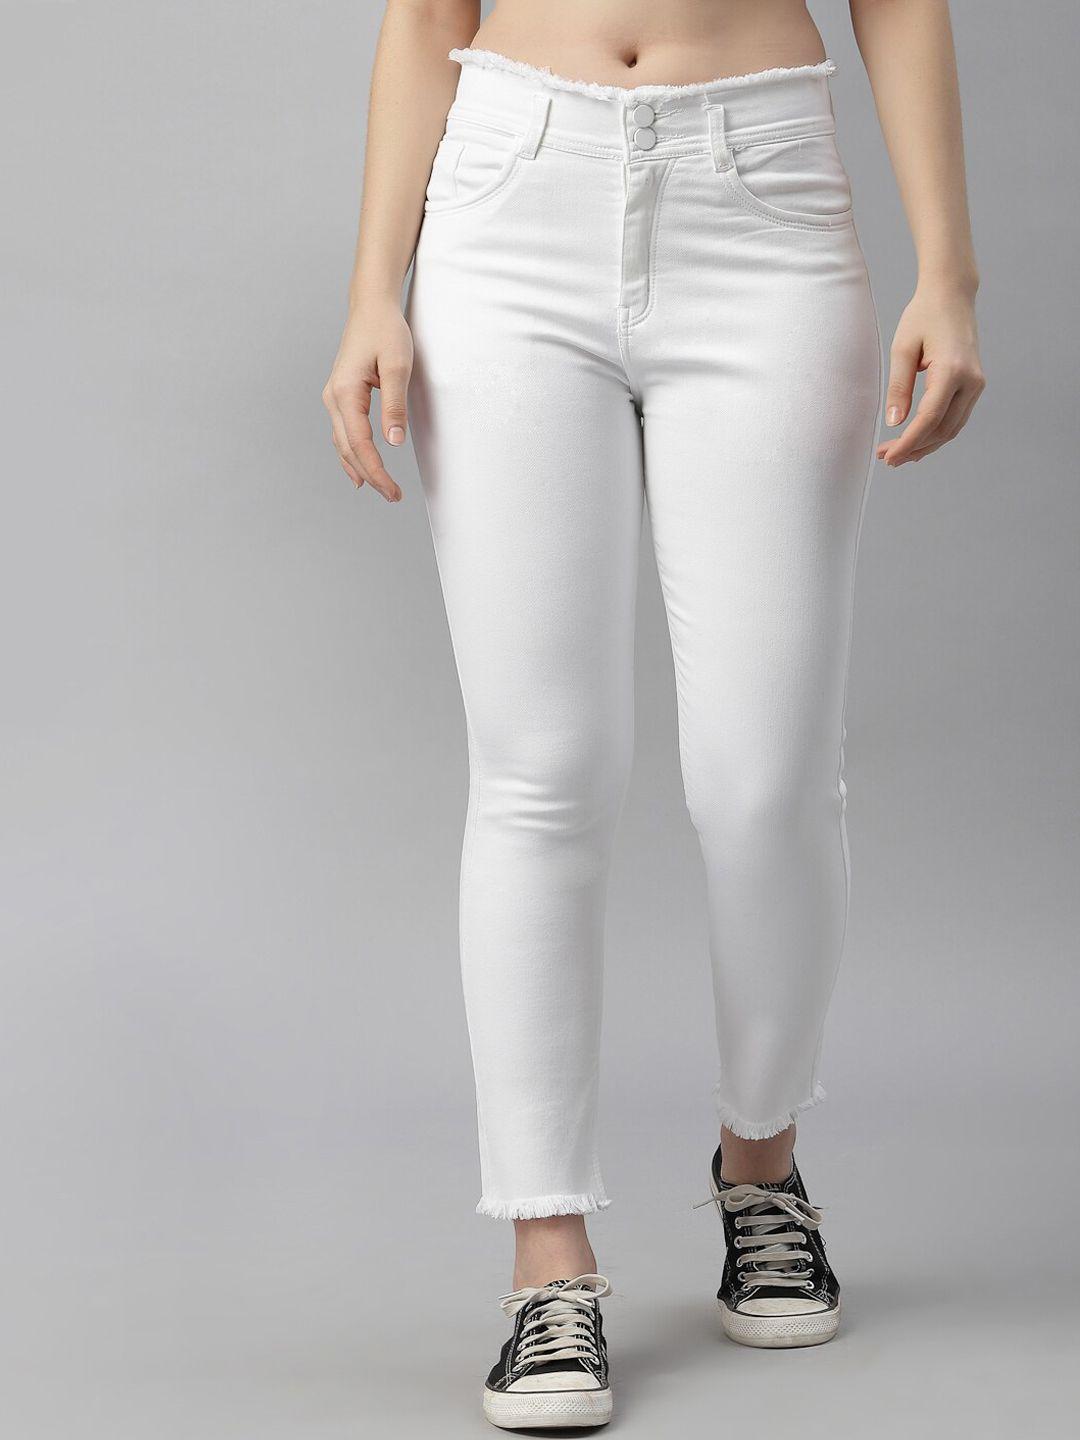 kassually women white stretchable jeans